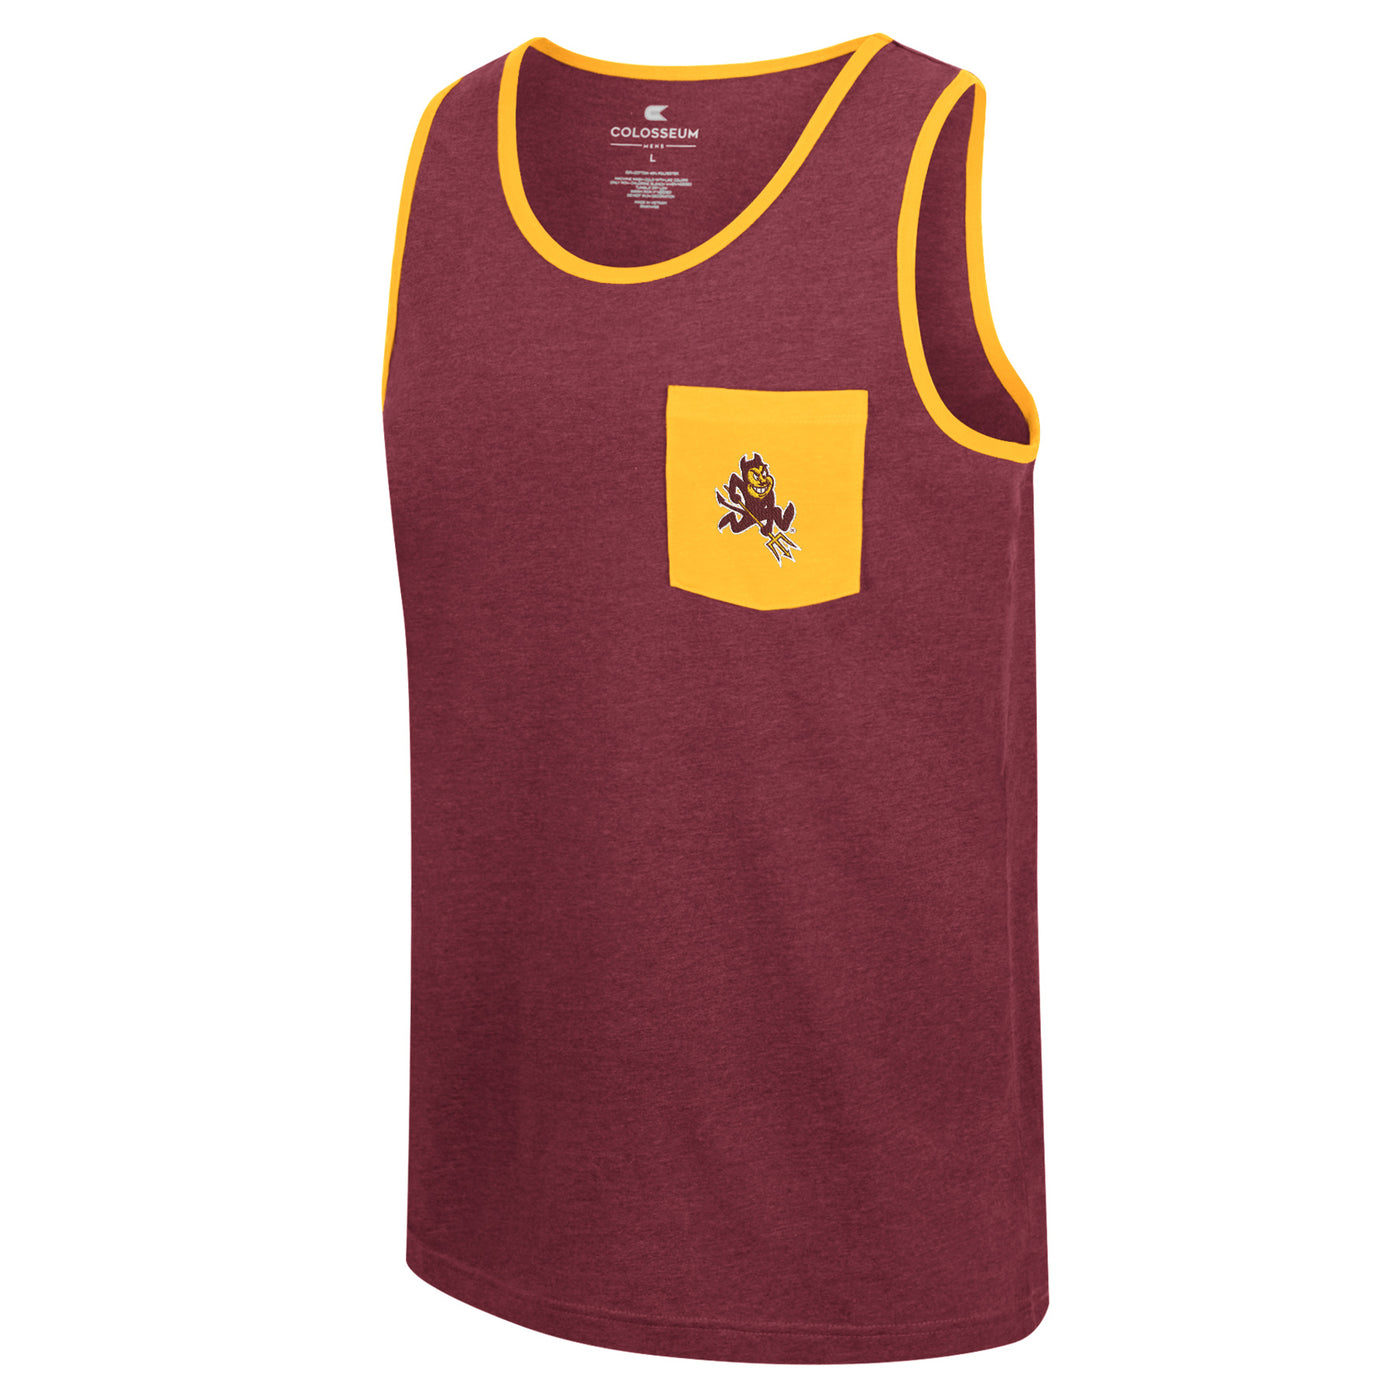 Maroon mens tank top with gold trim. Gold pocket on chest with a sparky mascot.